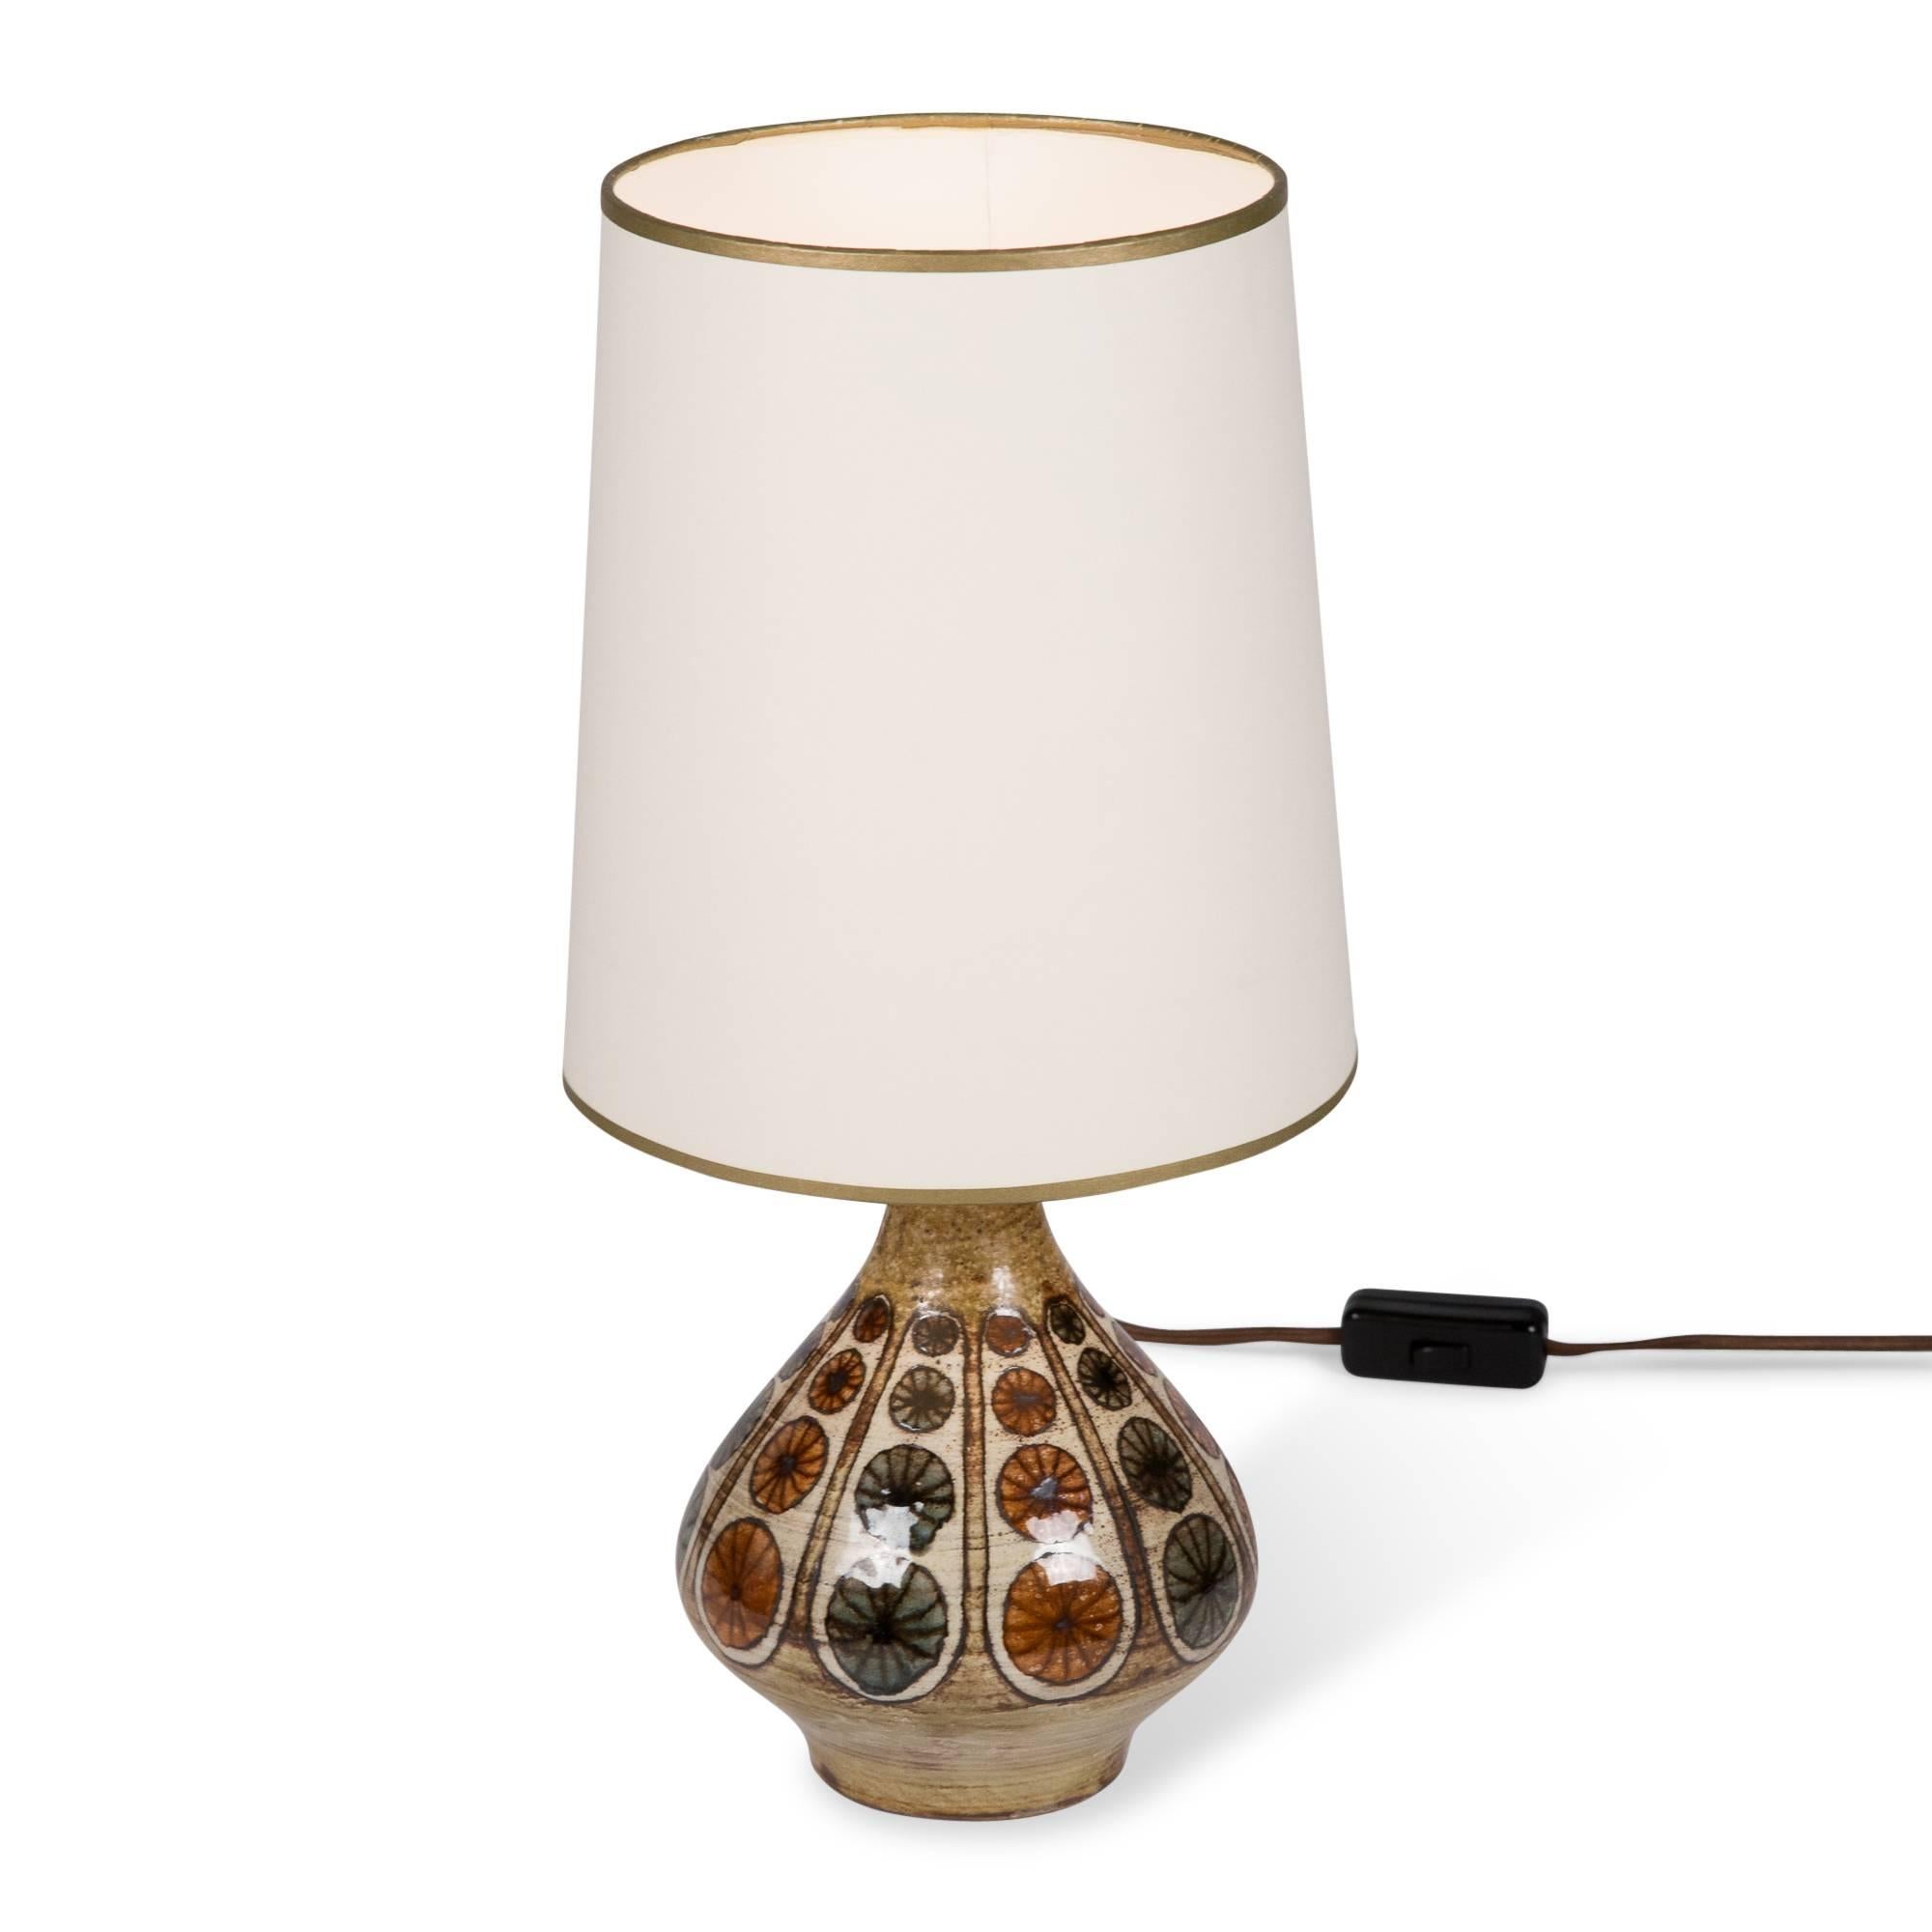 Mid-20th Century Ceramic Table Lamp by Jean Malarmey, French, 1960s For Sale